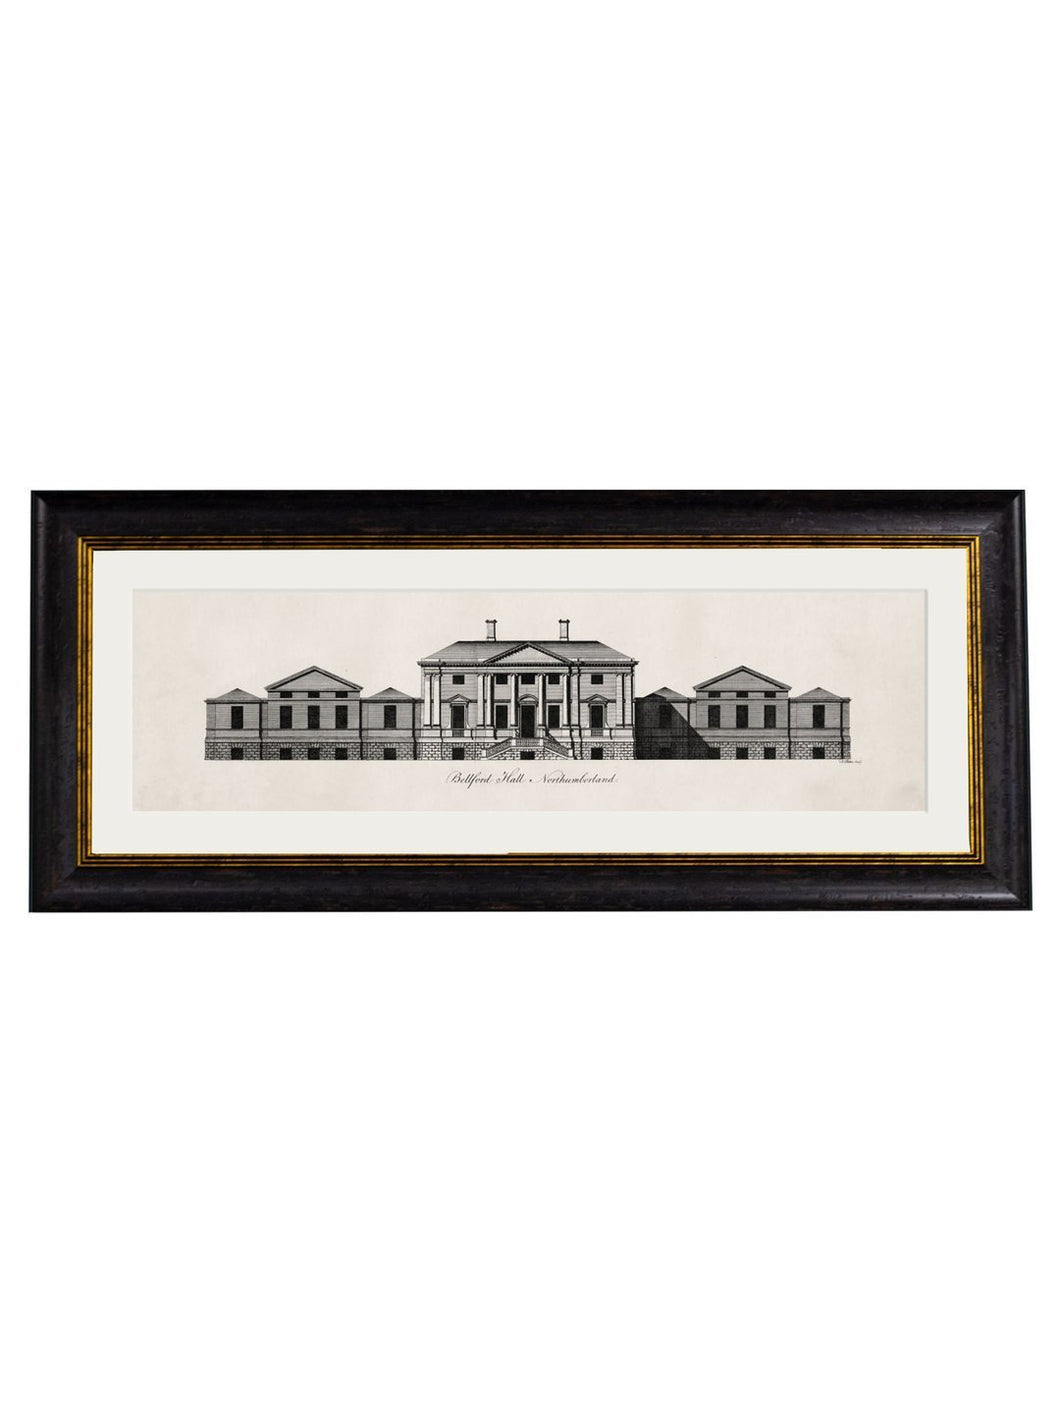 Framed Architectural Elevations of Stately Homes Prints - Referenced From A 1700s Architectural Elevation EngravingVintage FrogPictures & Prints